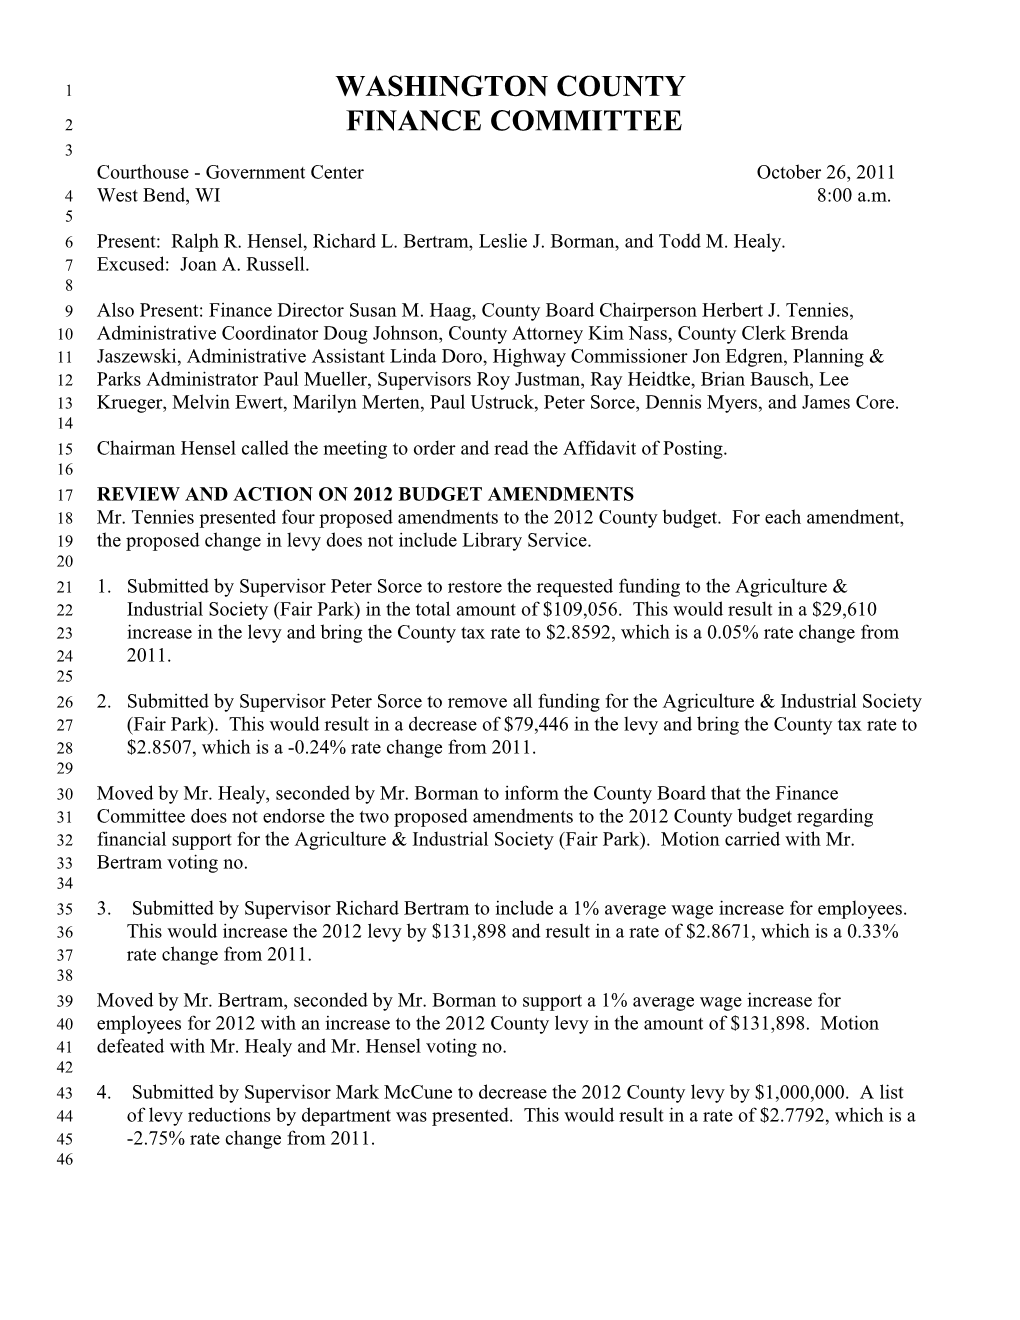 Finance Committeeoctober 26, 2011 Page 1 of 2